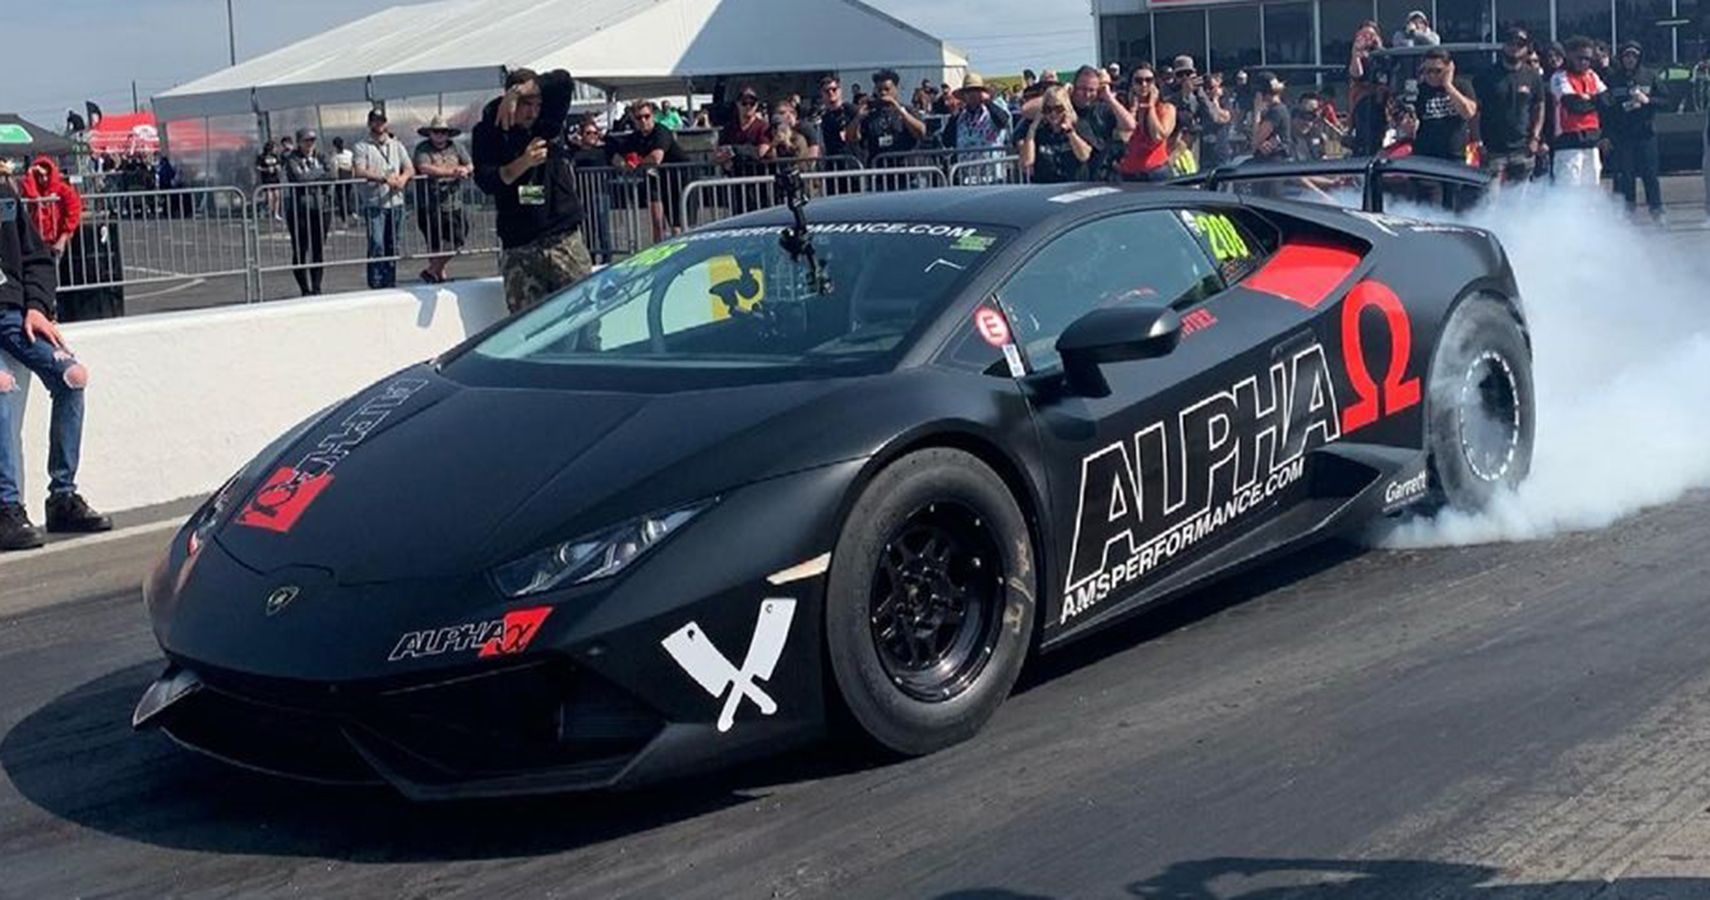 Lamborghini Huracan From Netflix's 'Hyperdrive' Hits Quarter Mile In   Seconds